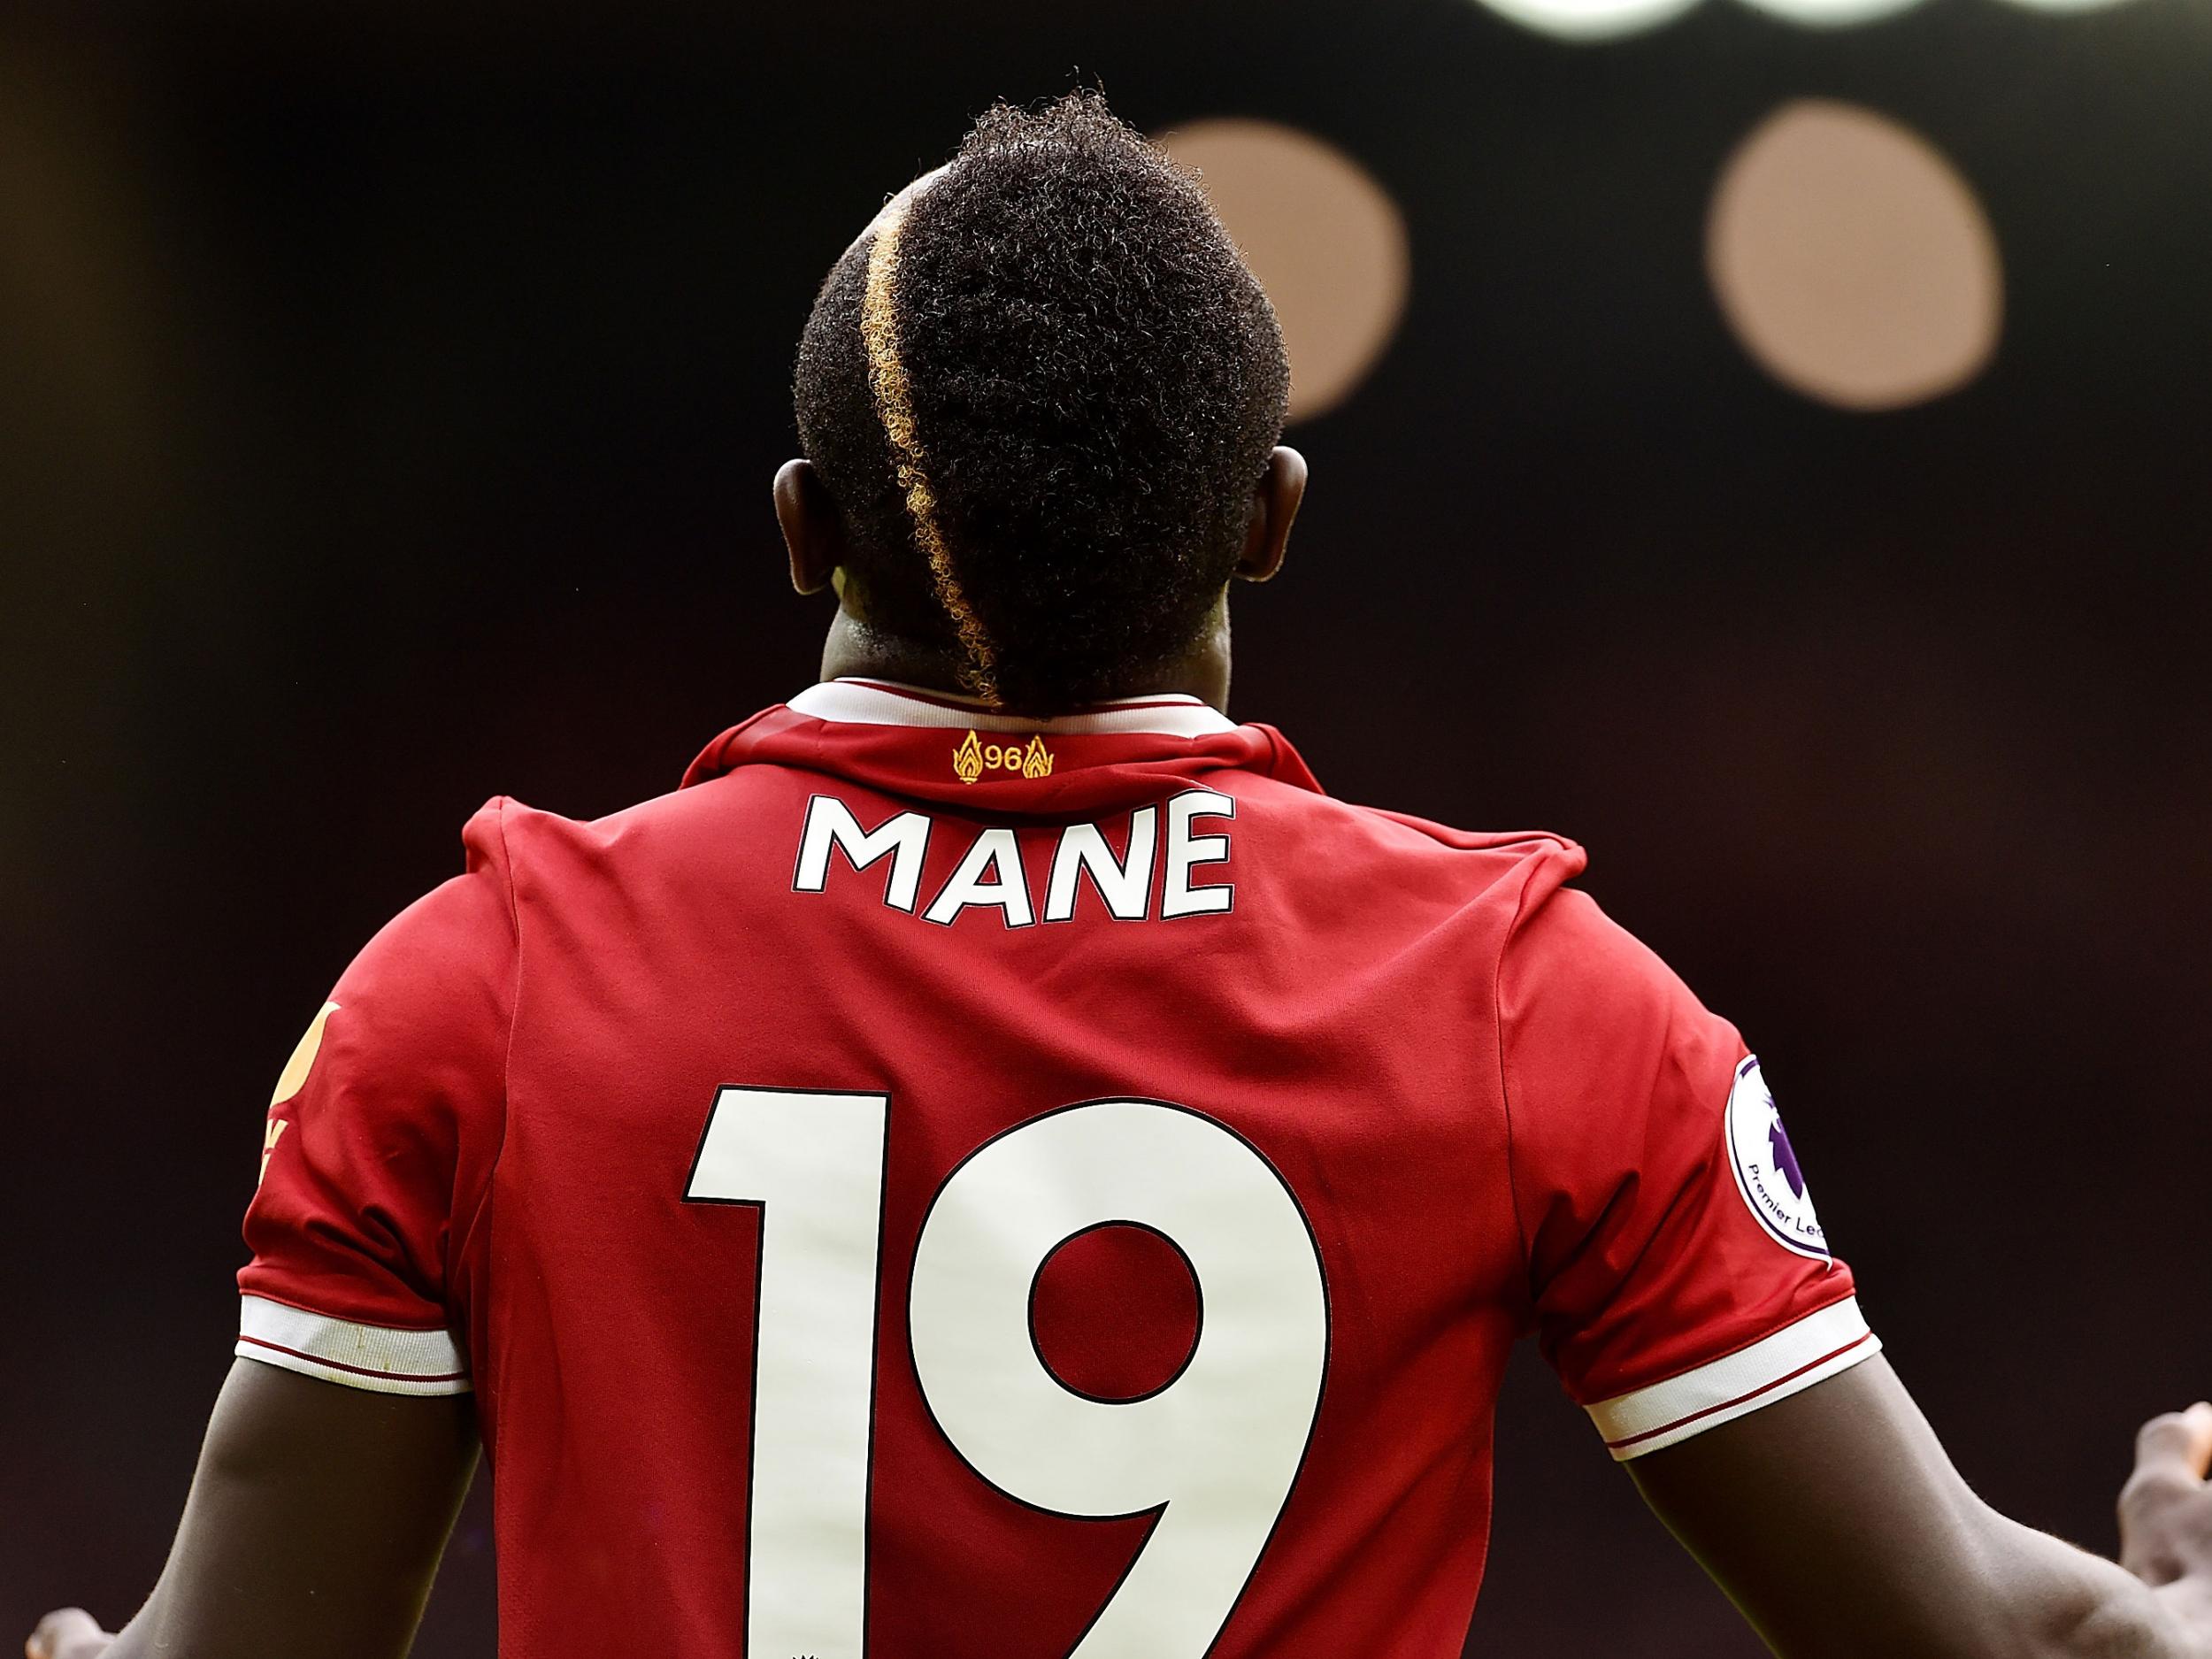 Sadio Mané has been ruled out of Saturday's clash against Manchester United with a hamstring injury